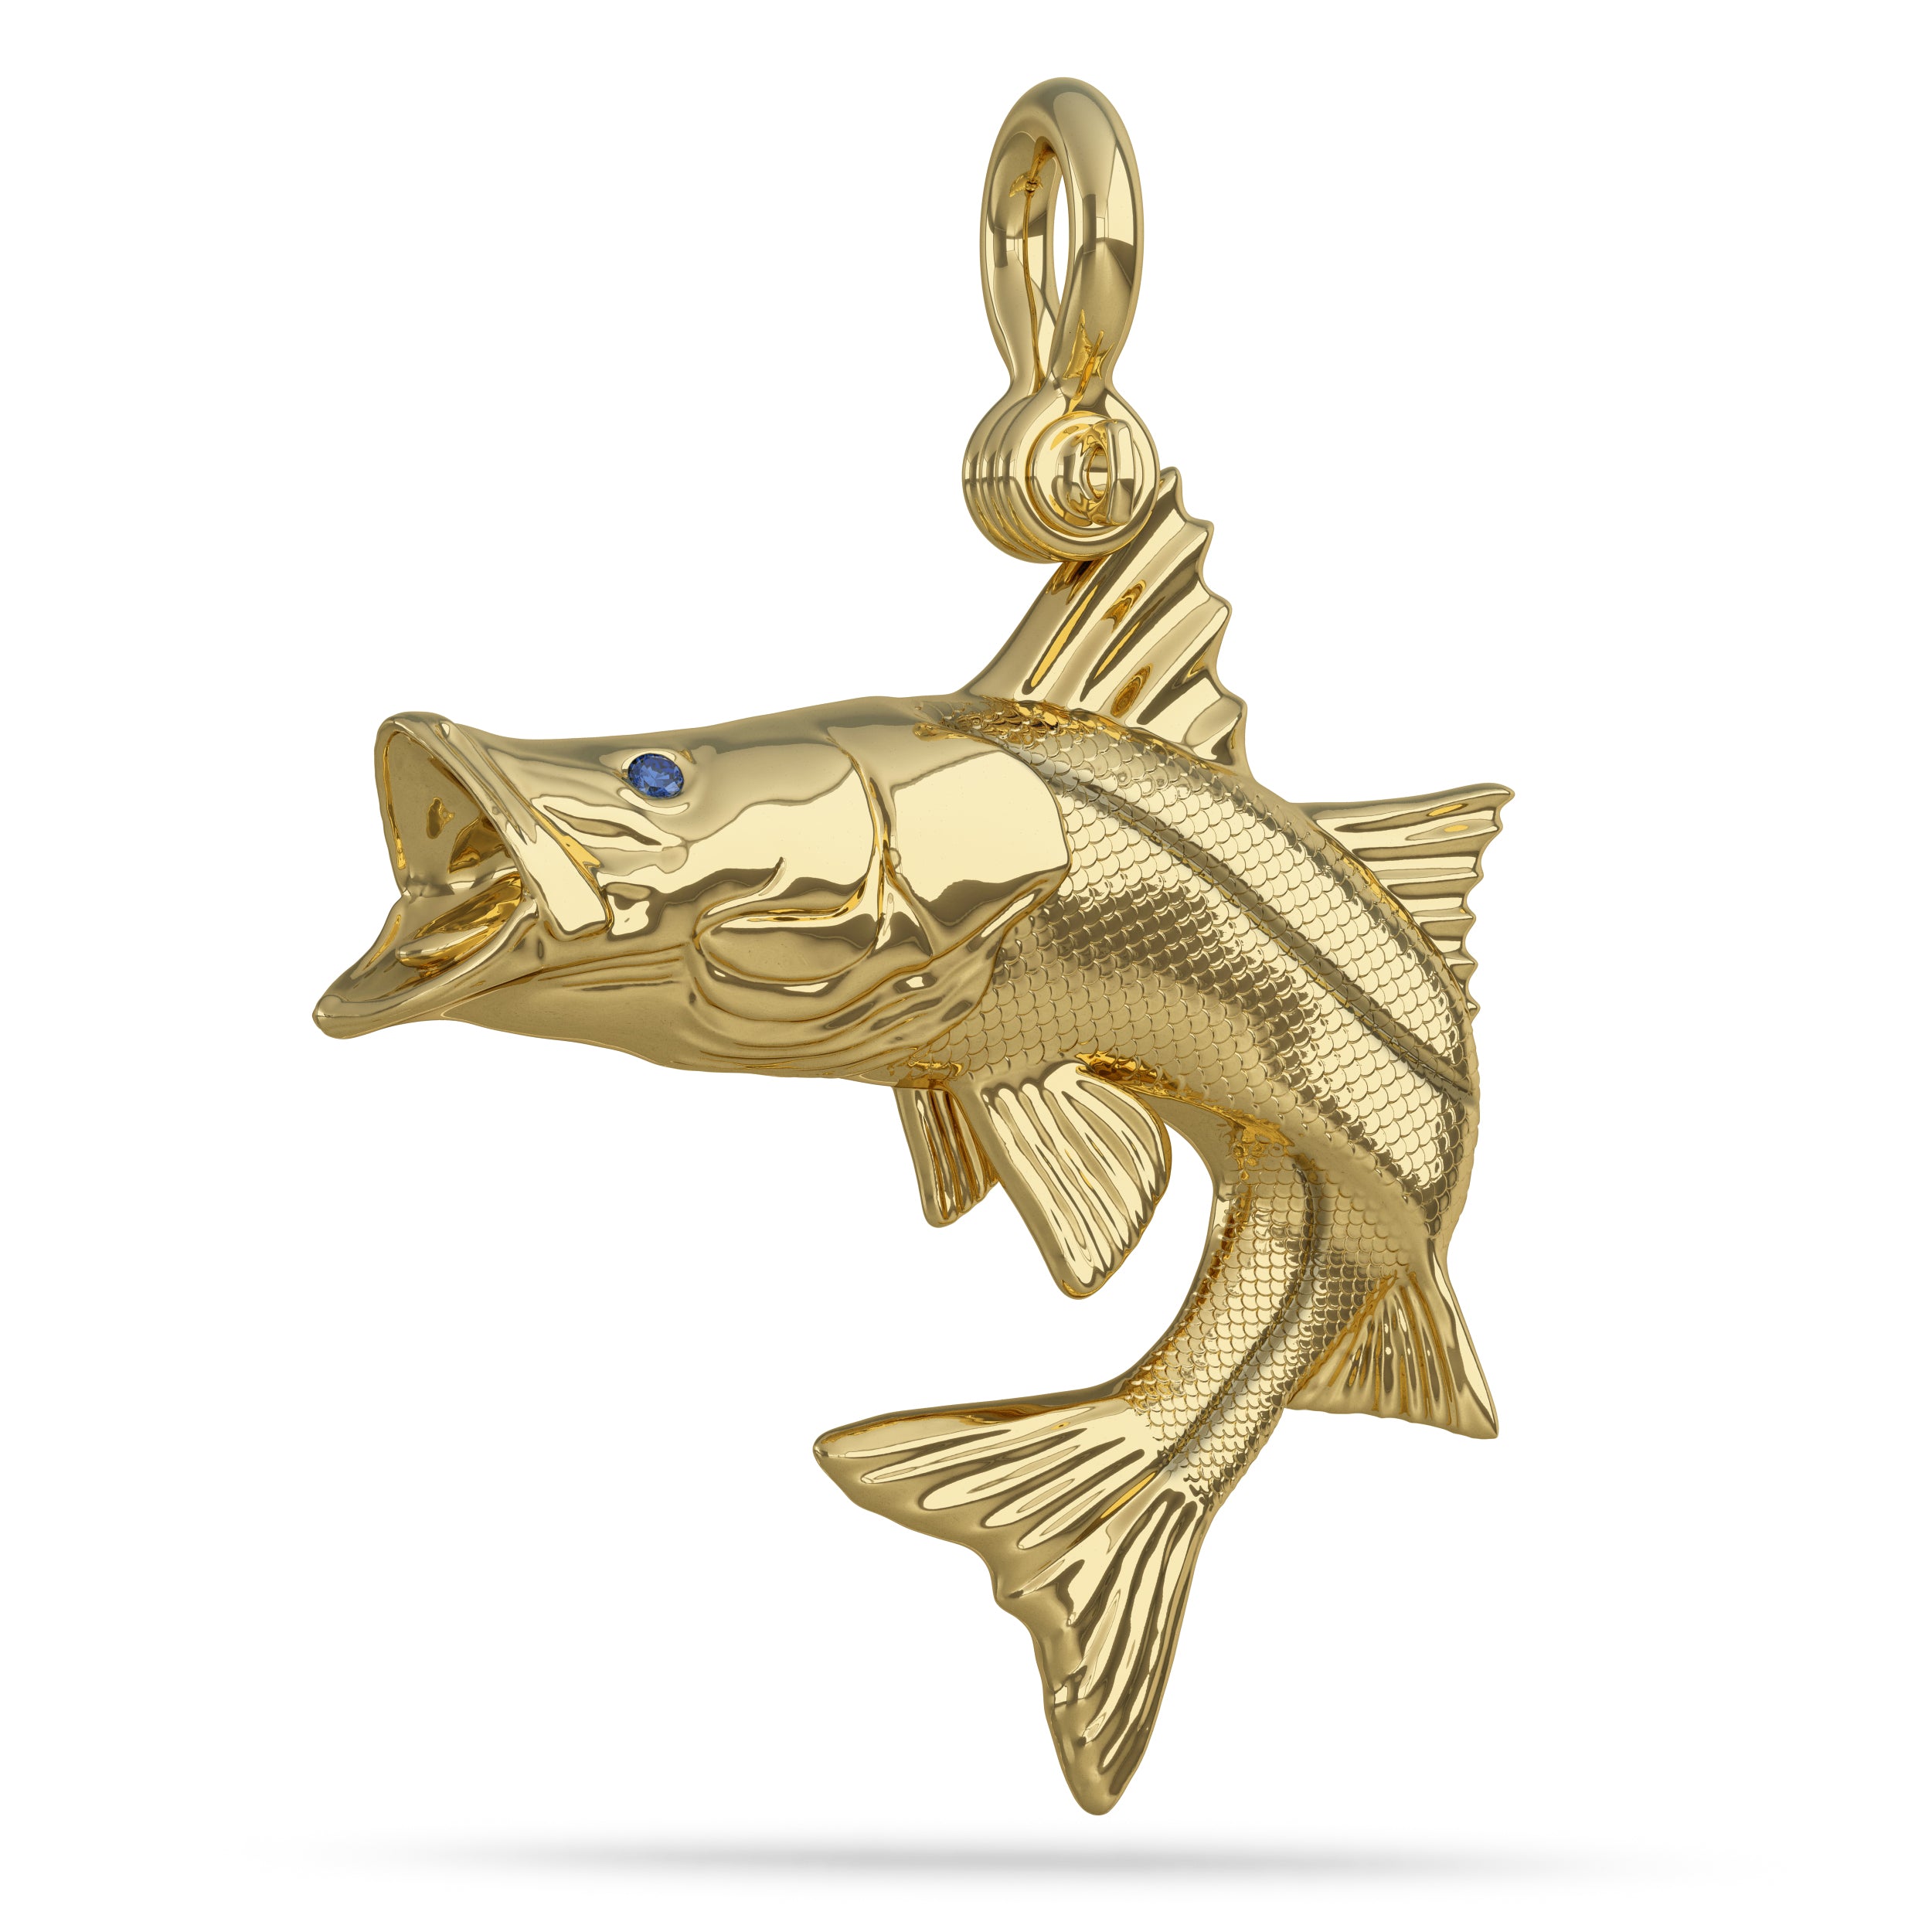 Snook In Action Gold Fish Pendant 